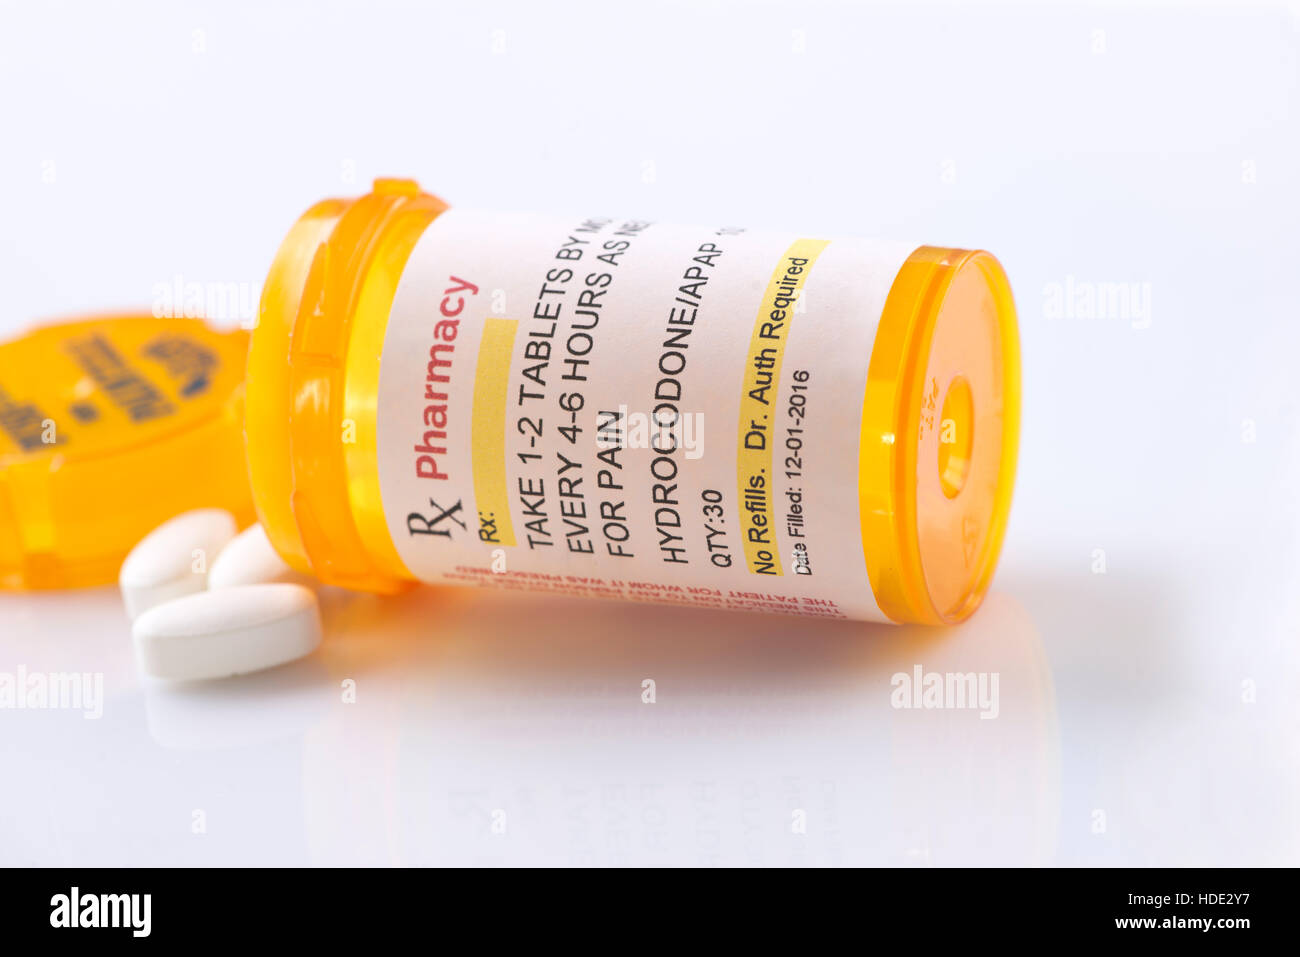 Hydrocodone prescription bottle.  Hydrocodone is a generic medication name and label was created by photographer. Stock Photo